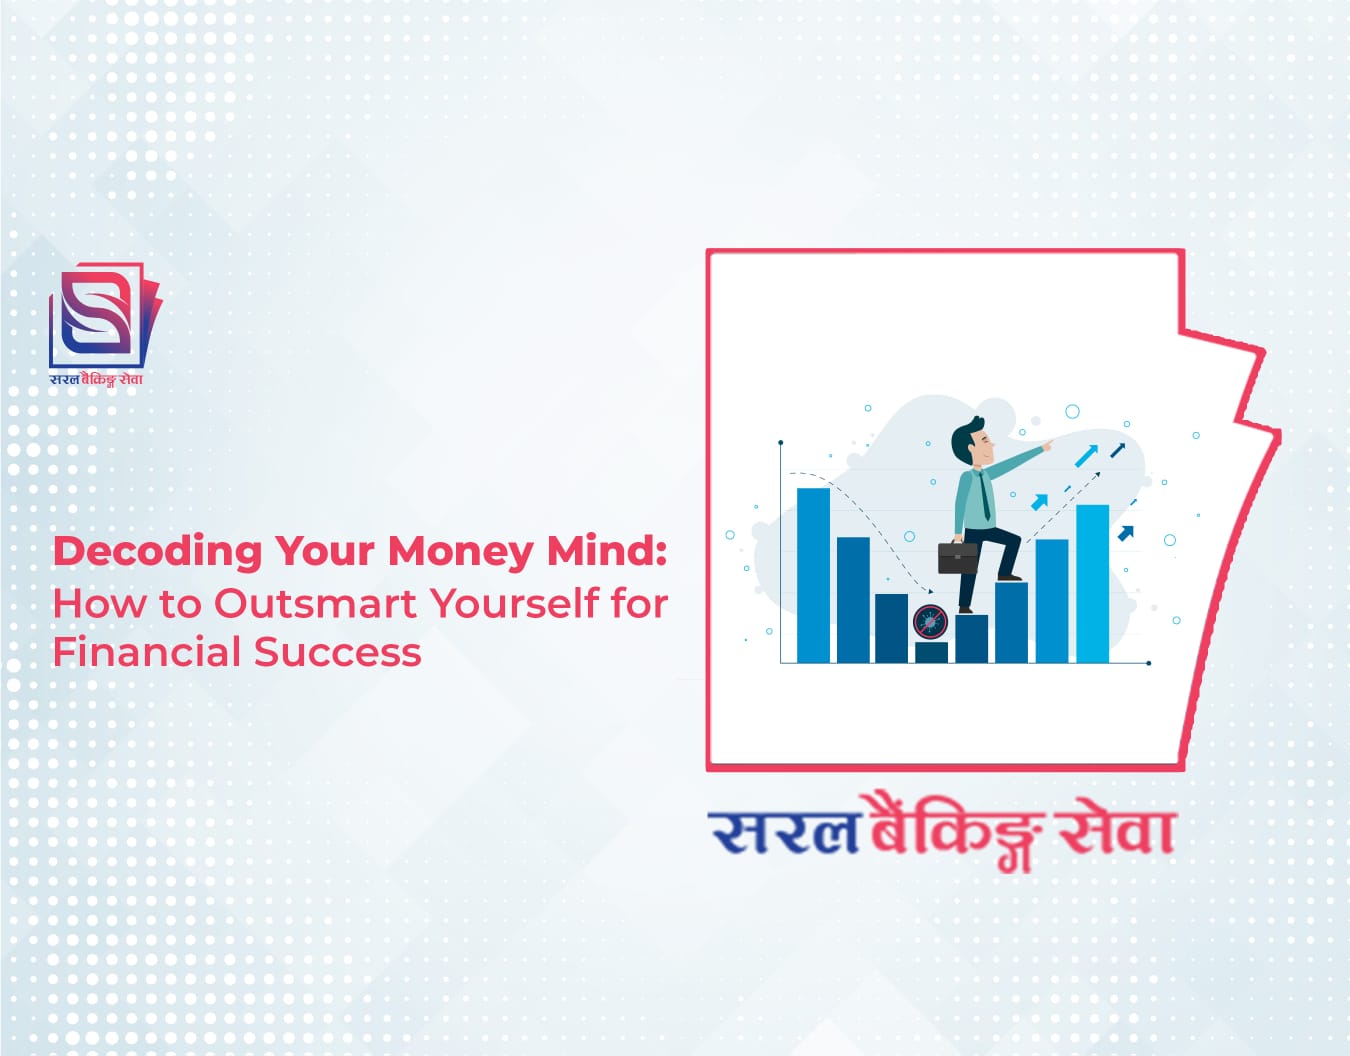 Decoding Your Money Mind: How to Outsmart Yourself for Financial Success